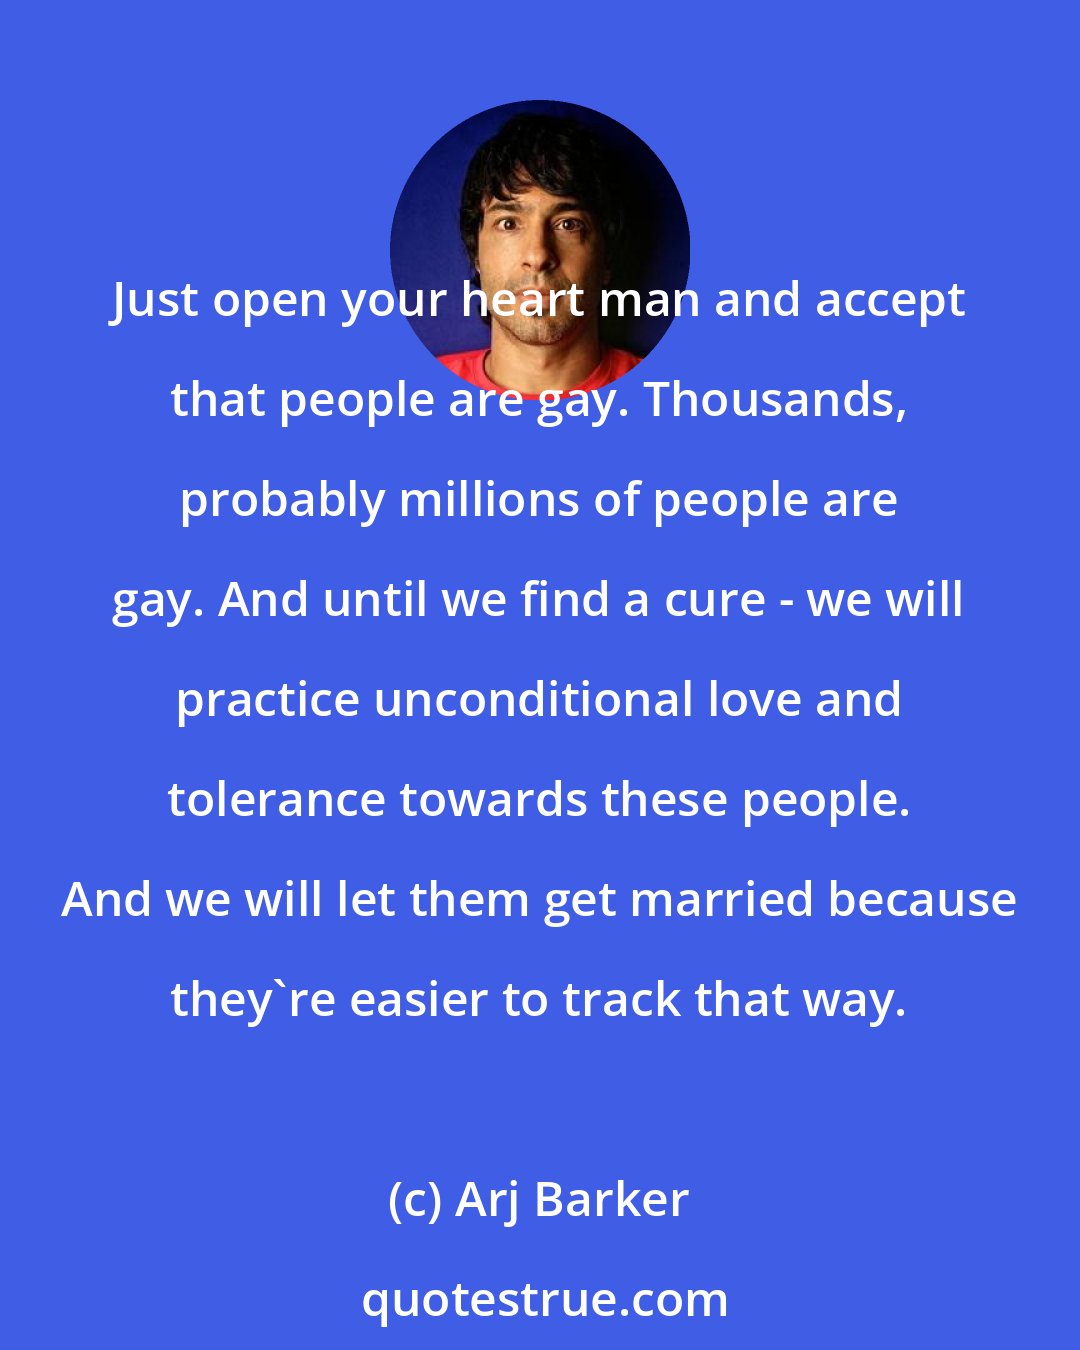 Arj Barker: Just open your heart man and accept that people are gay. Thousands, probably millions of people are gay. And until we find a cure - we will practice unconditional love and tolerance towards these people. And we will let them get married because they're easier to track that way.